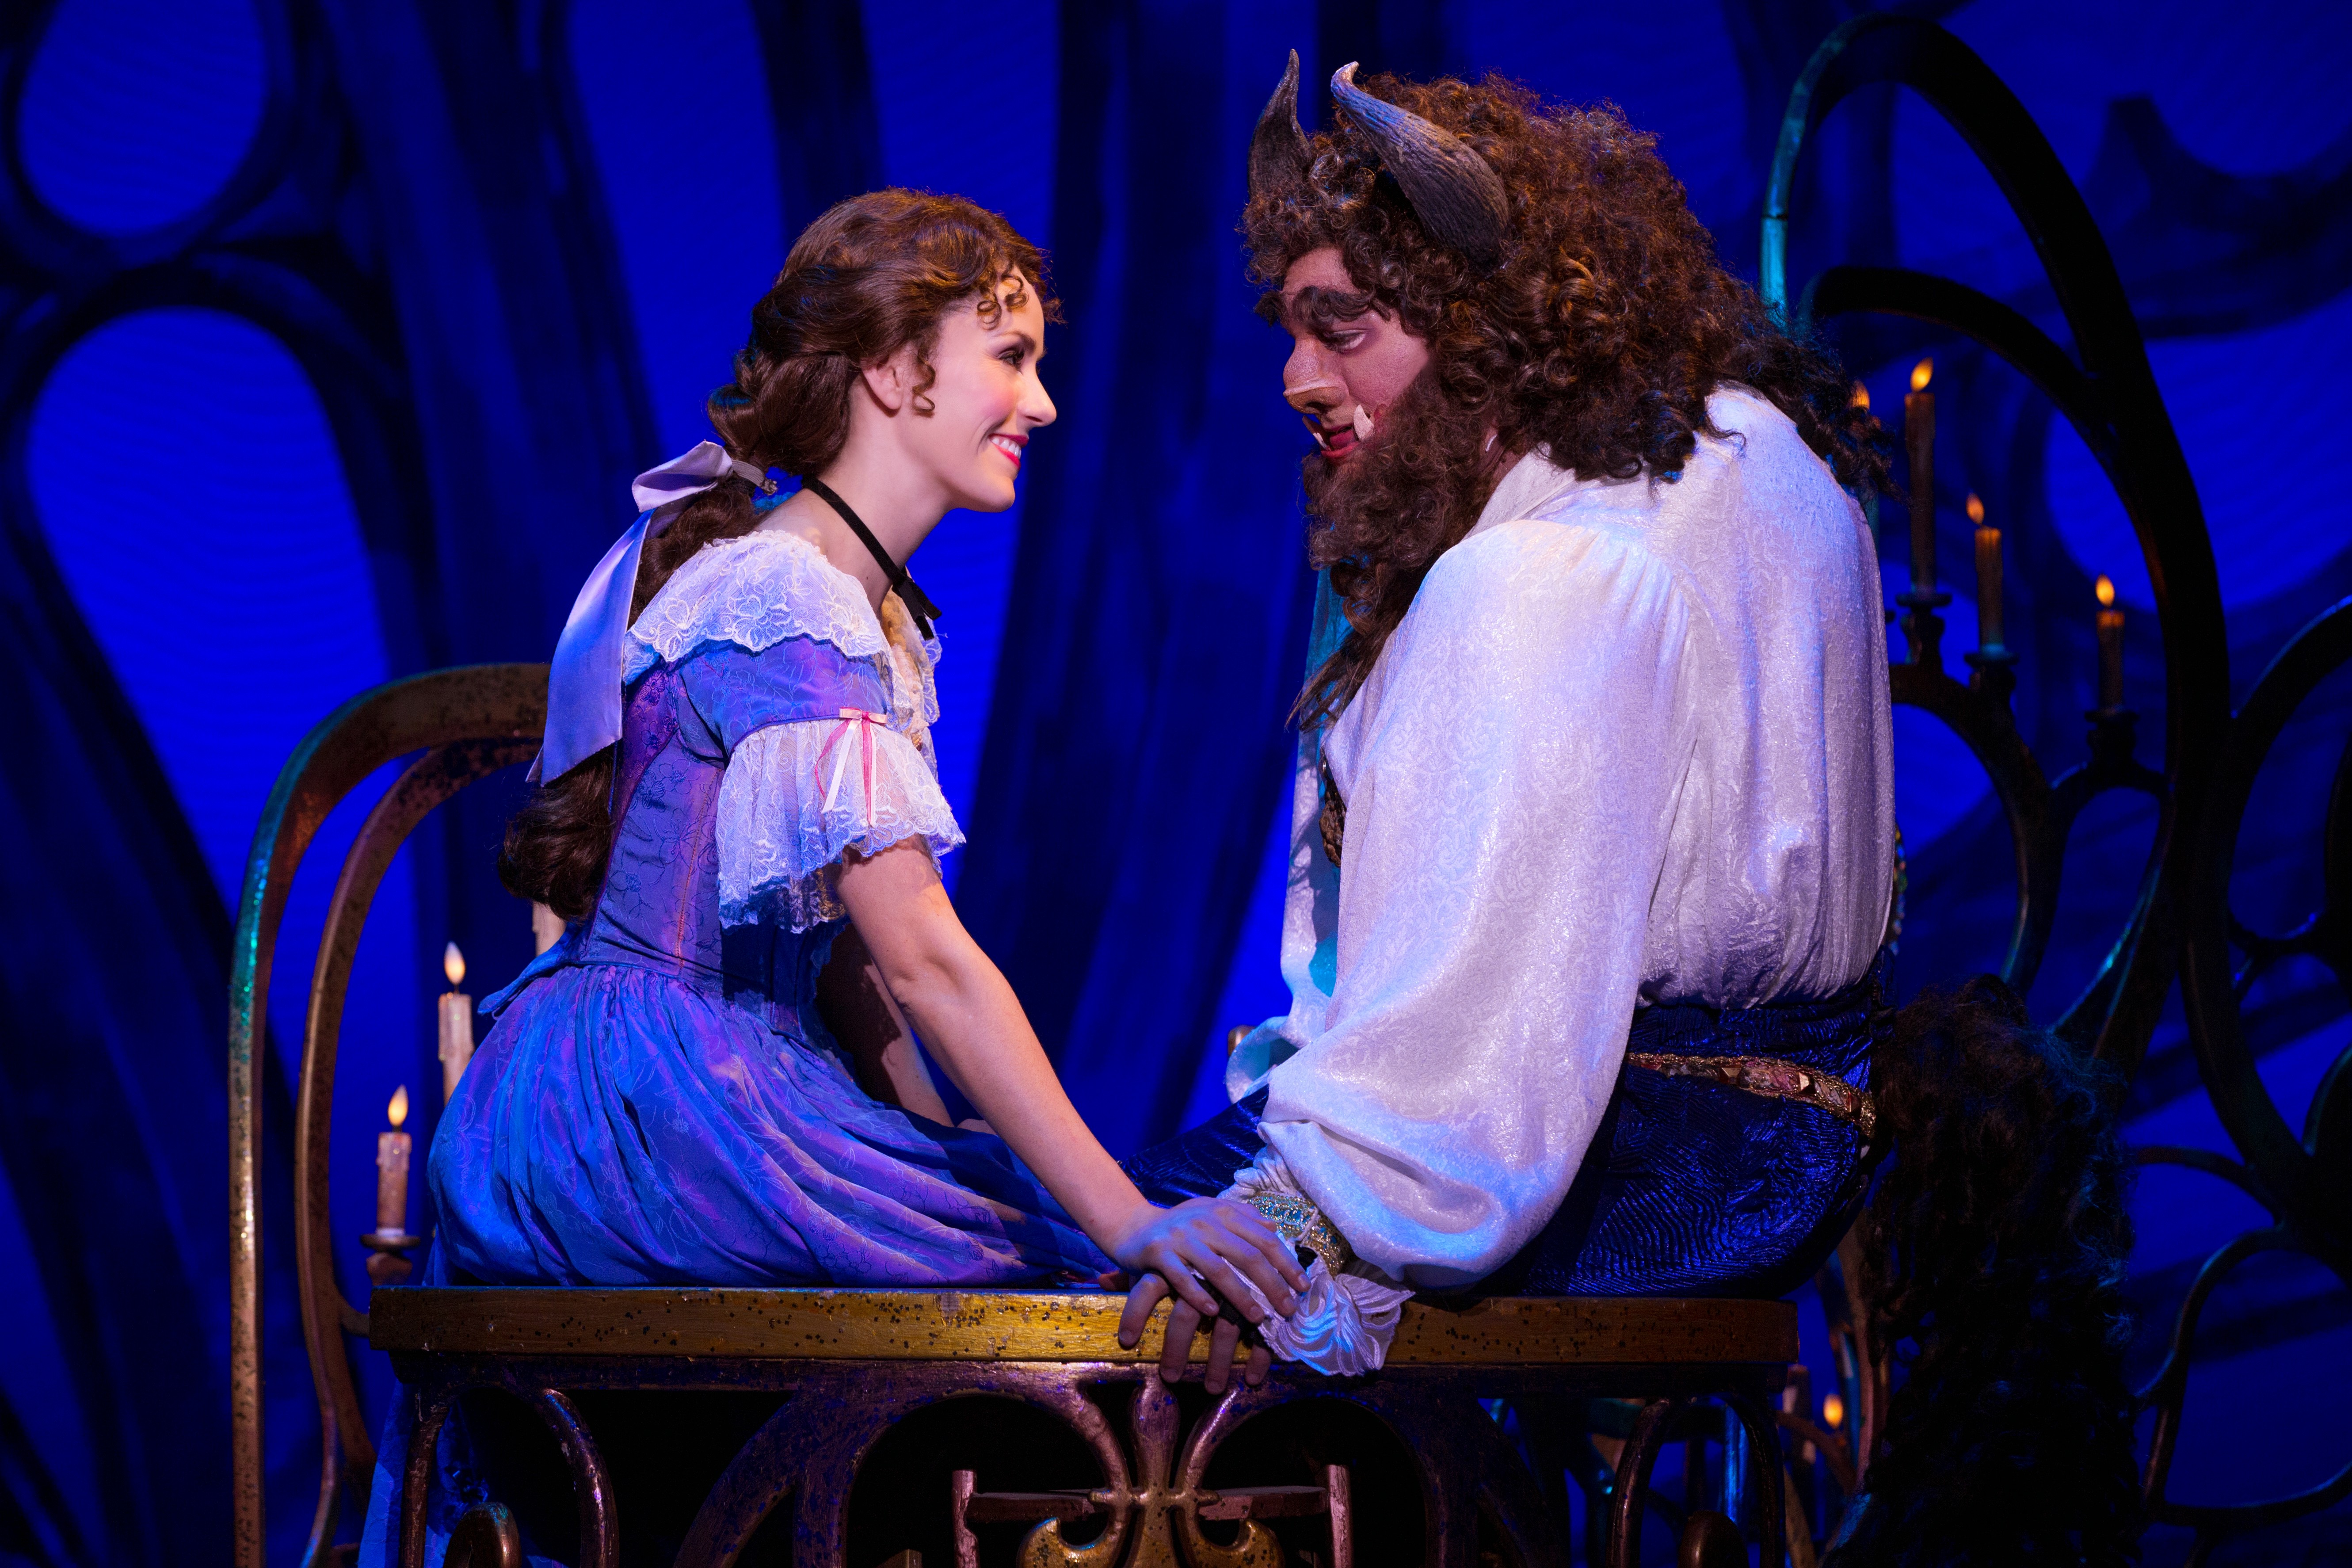 Broadway In Chicago Announces BEAUTY AND THE BEAST Returning To Chicago For One Week Only March 25 - 29 1 Broadway In Chicago is pleased to announce that individual tickets for Disney’s BEAUTY AND THE BEAST, the award-winning worldwide smash hit Broadway musical, go on sale to the public on Friday, January 23 at 10 AM.  Produced by NETworks Presentations, this elaborate theatrical production will come to life on stage at the Cadillac Palace Theatre (151 W Randolph) for a limited one-week engagement March 25 through 29.